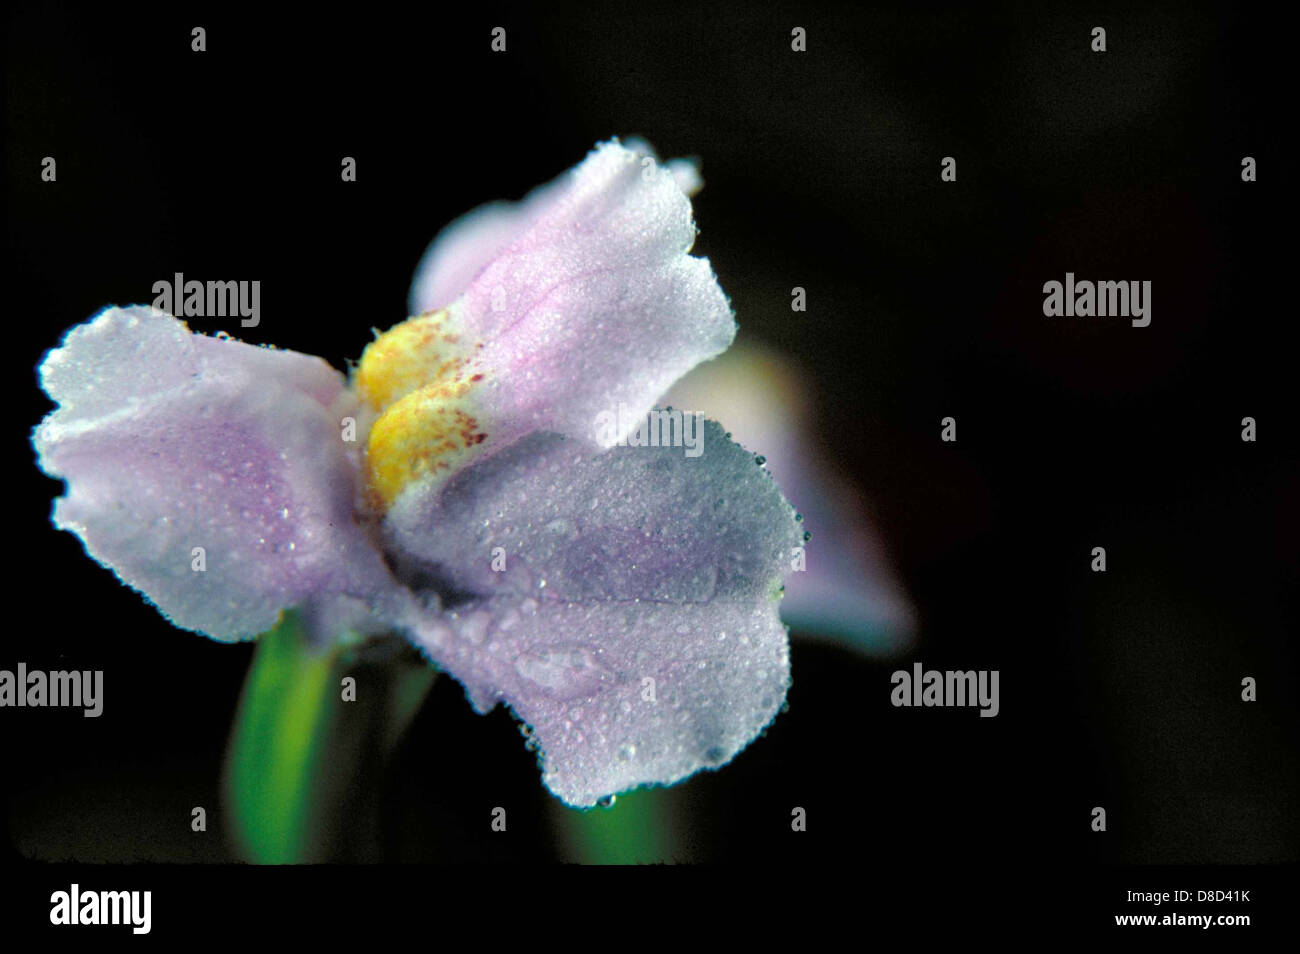 Picture of a small blue winged monkey flower mimulus alatus. Stock Photo